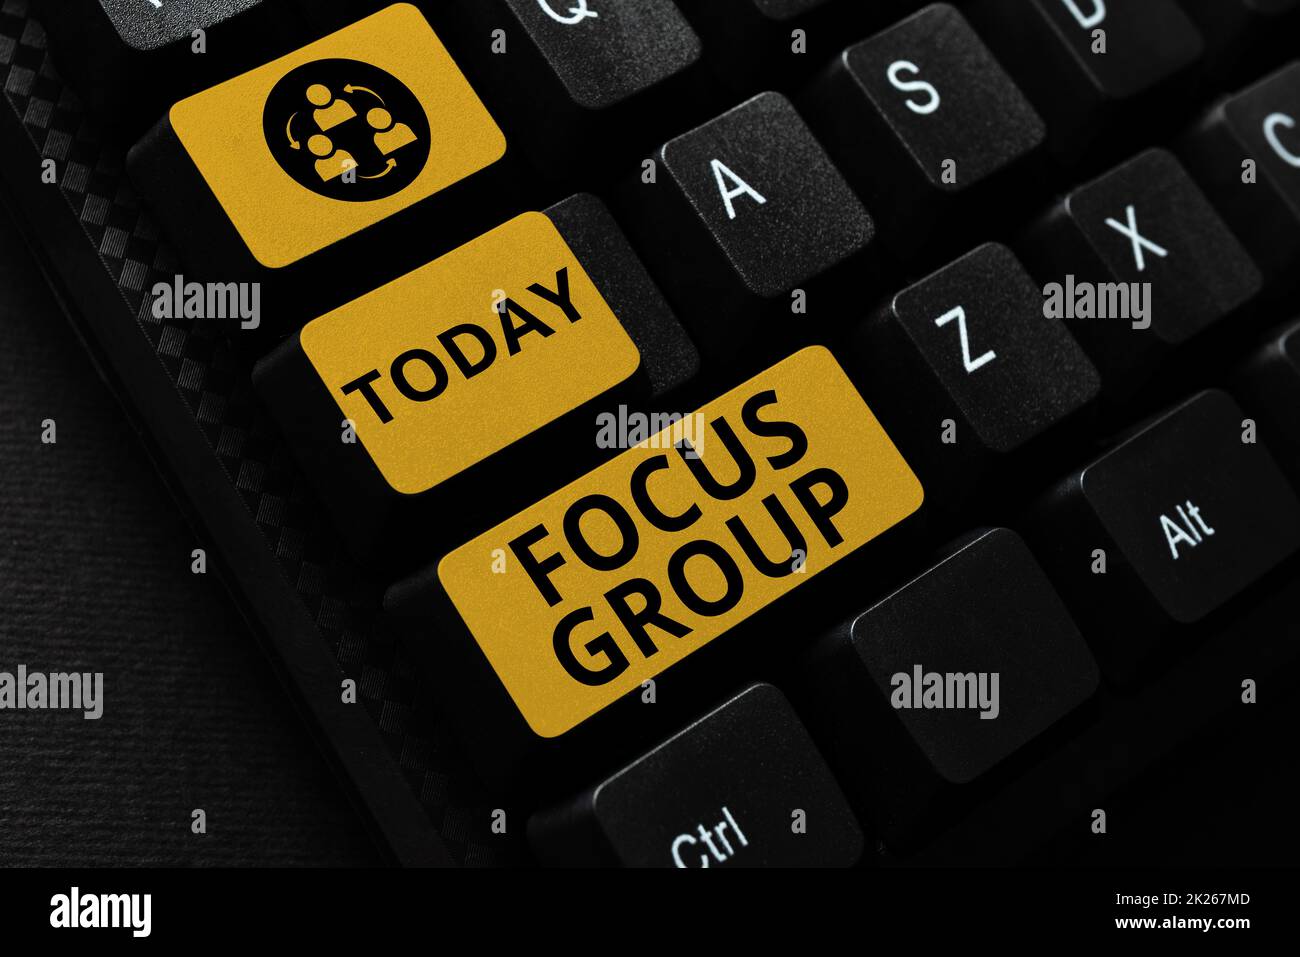 Focus Group - Essential Business Technology